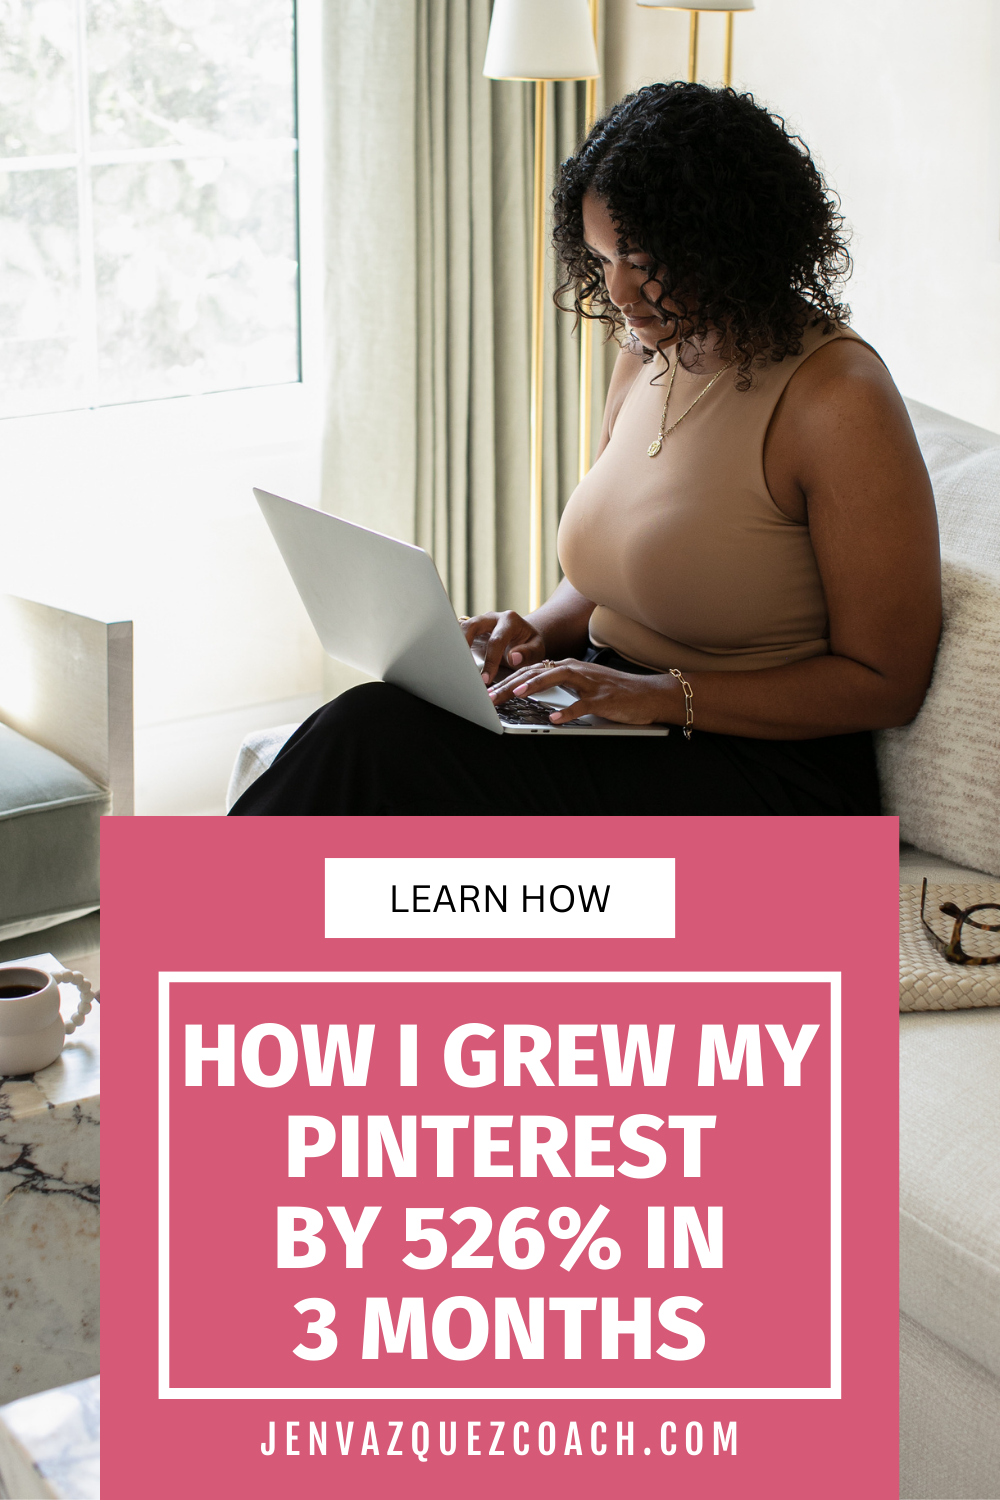 Pinterest Pin with "How I Grew My Pinterest by 526% in 3 Months Pinterest pins by Jen Vazquez Media"